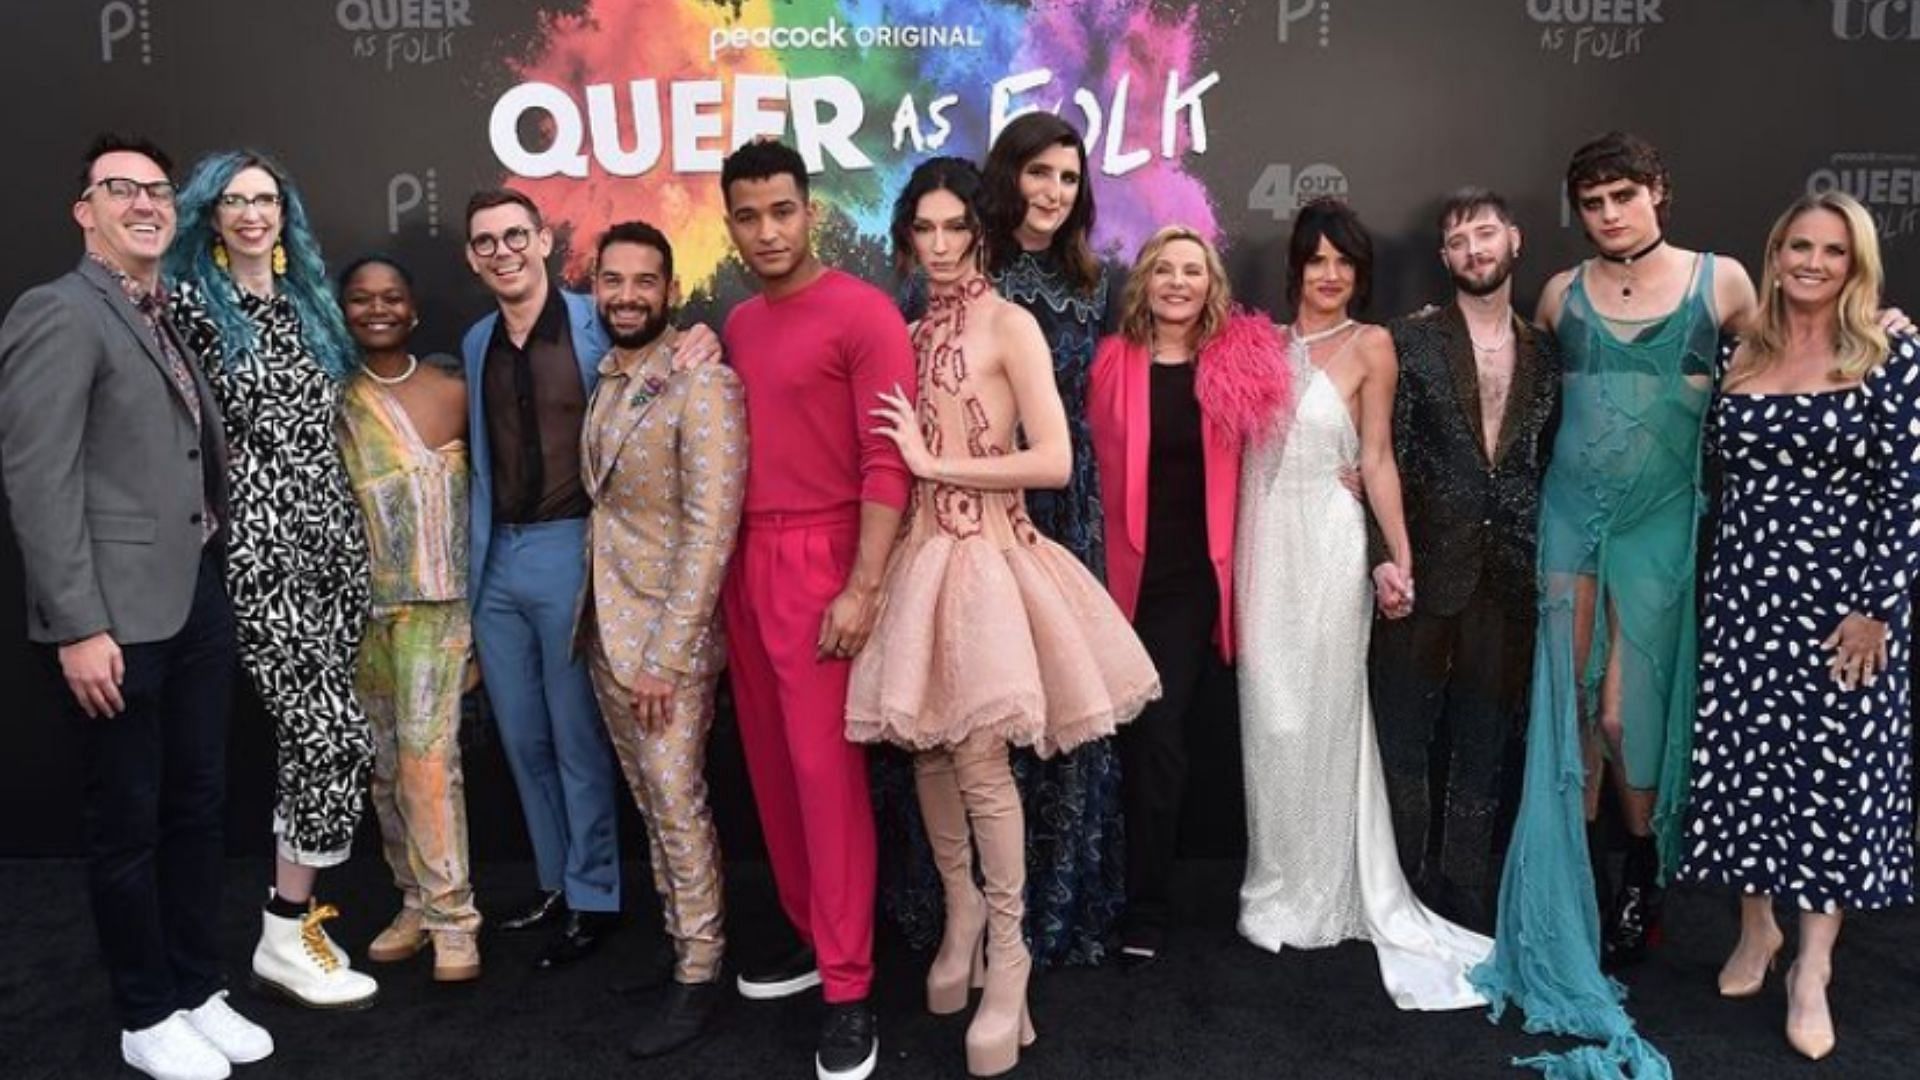 The Queer as Folk cast at the Los Angeles world premiere last Friday (Image via @asepiol/Instagram)